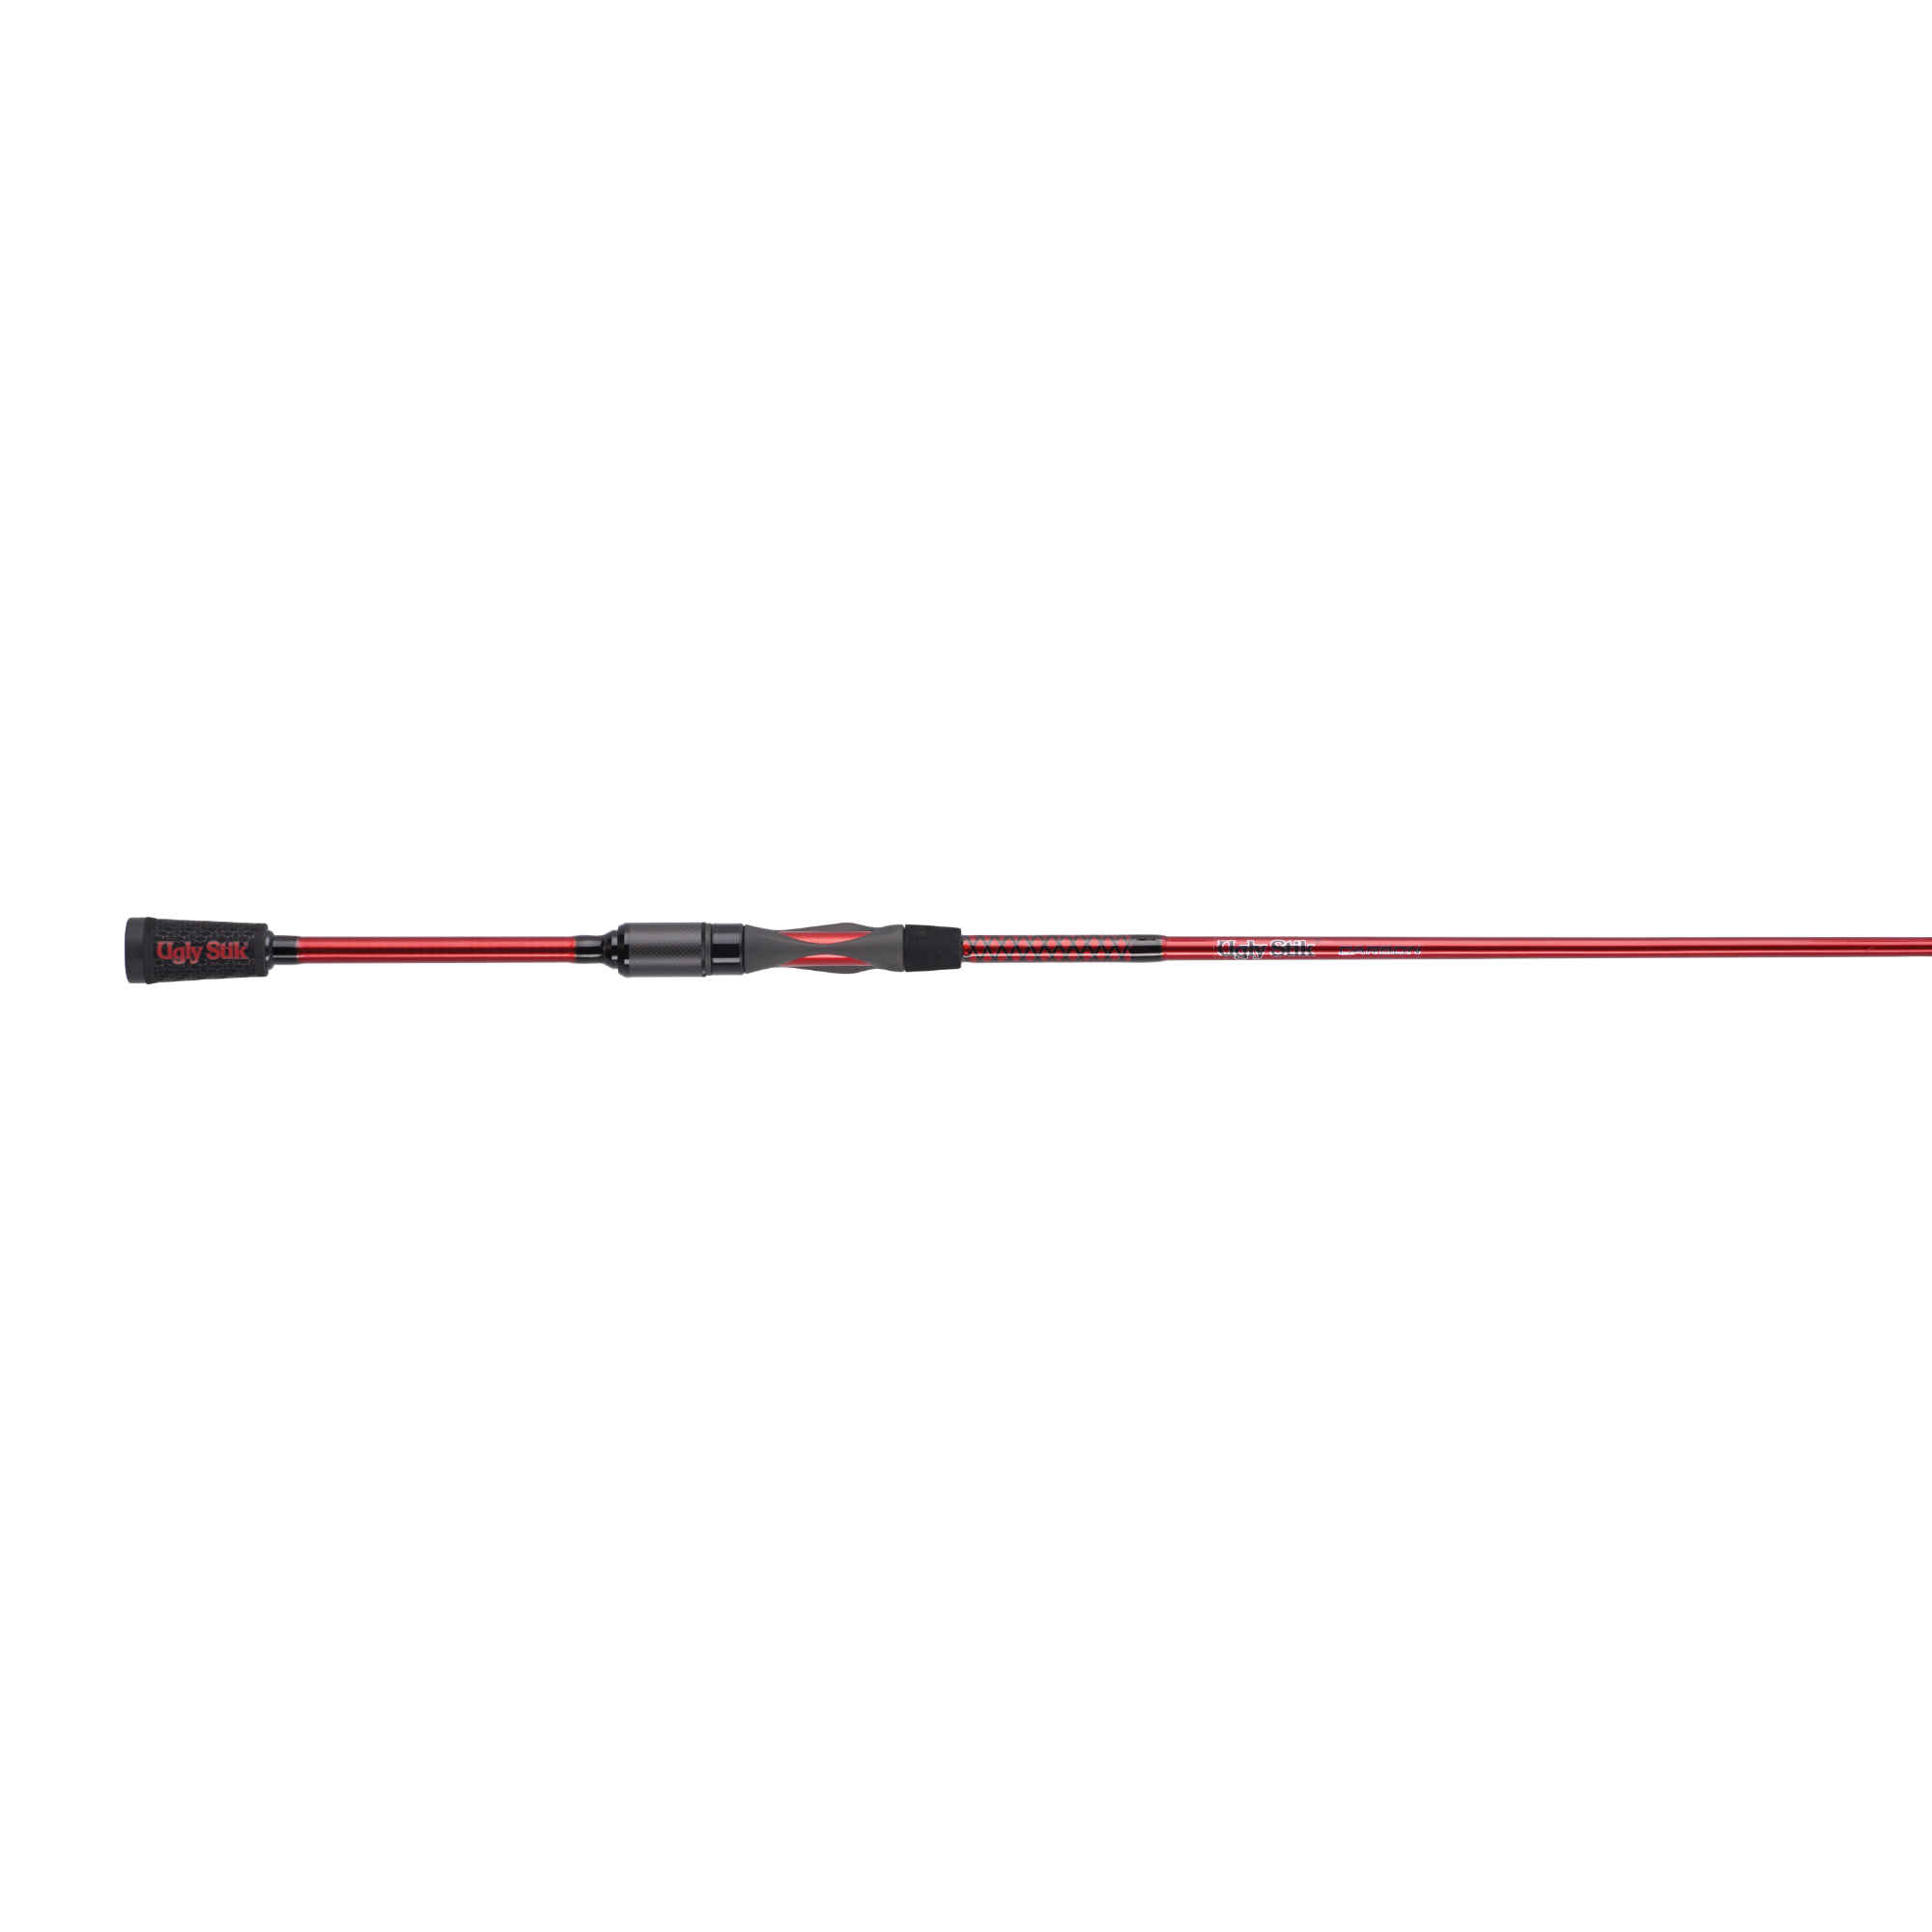 Ugly Stik Carbon Spinning Rod, 1 Piece, Medium, Fast, 8 Guides, 3